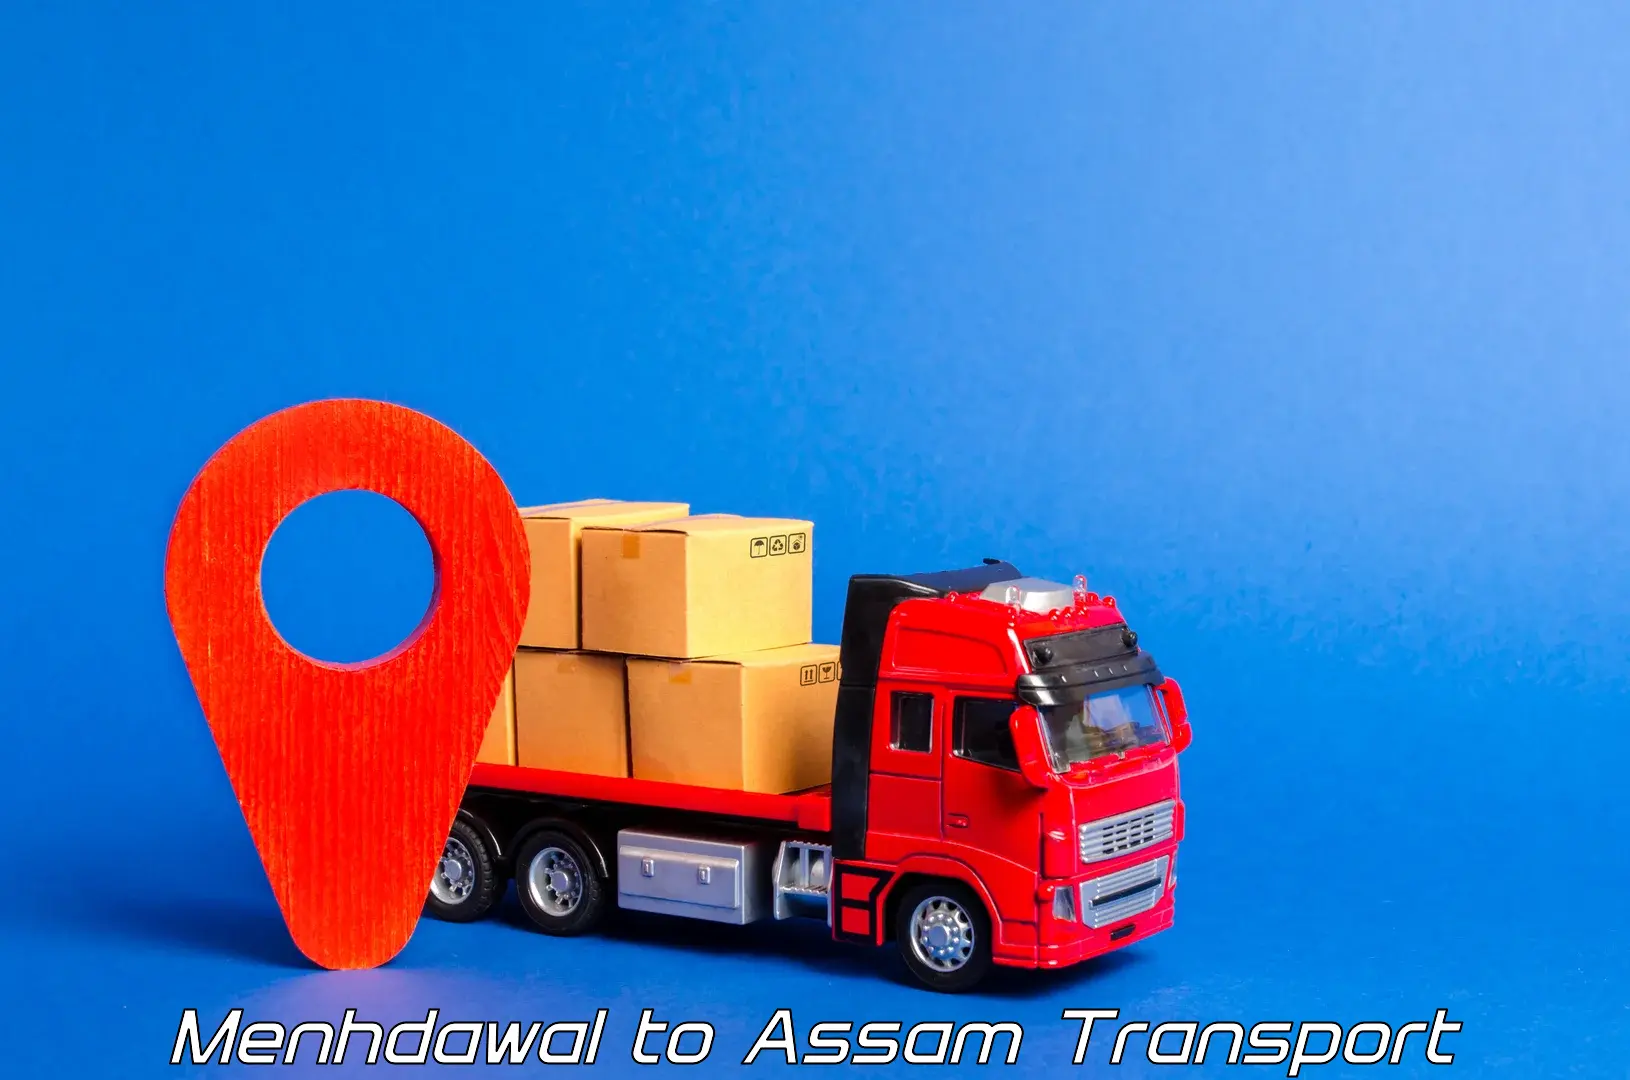 Daily parcel service transport Menhdawal to Doom Dooma